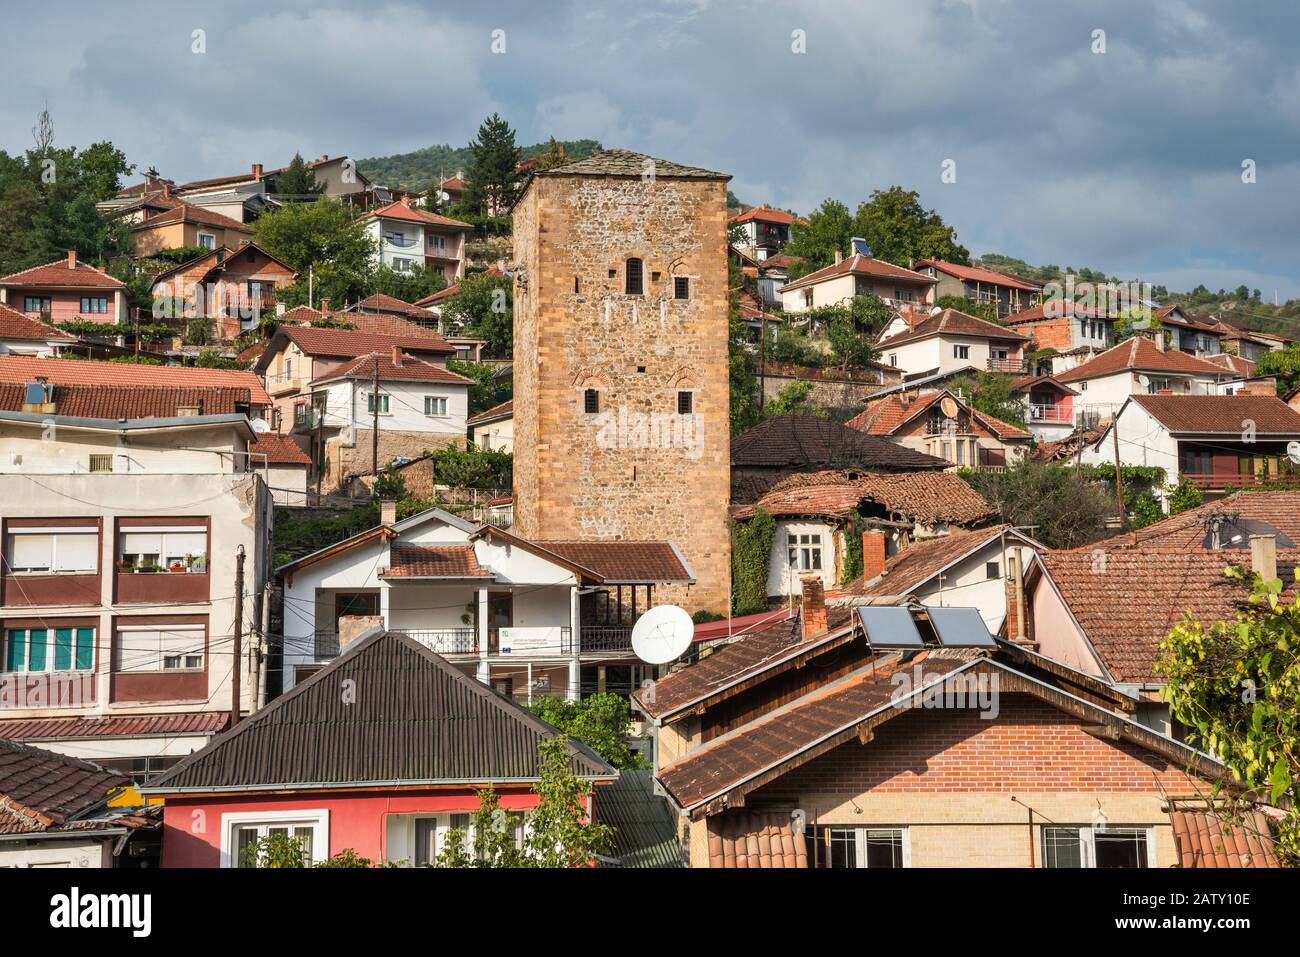 Simic Tower, early Ottoman period defensive tower, in Kratovo, North Macedonia Stock Photo